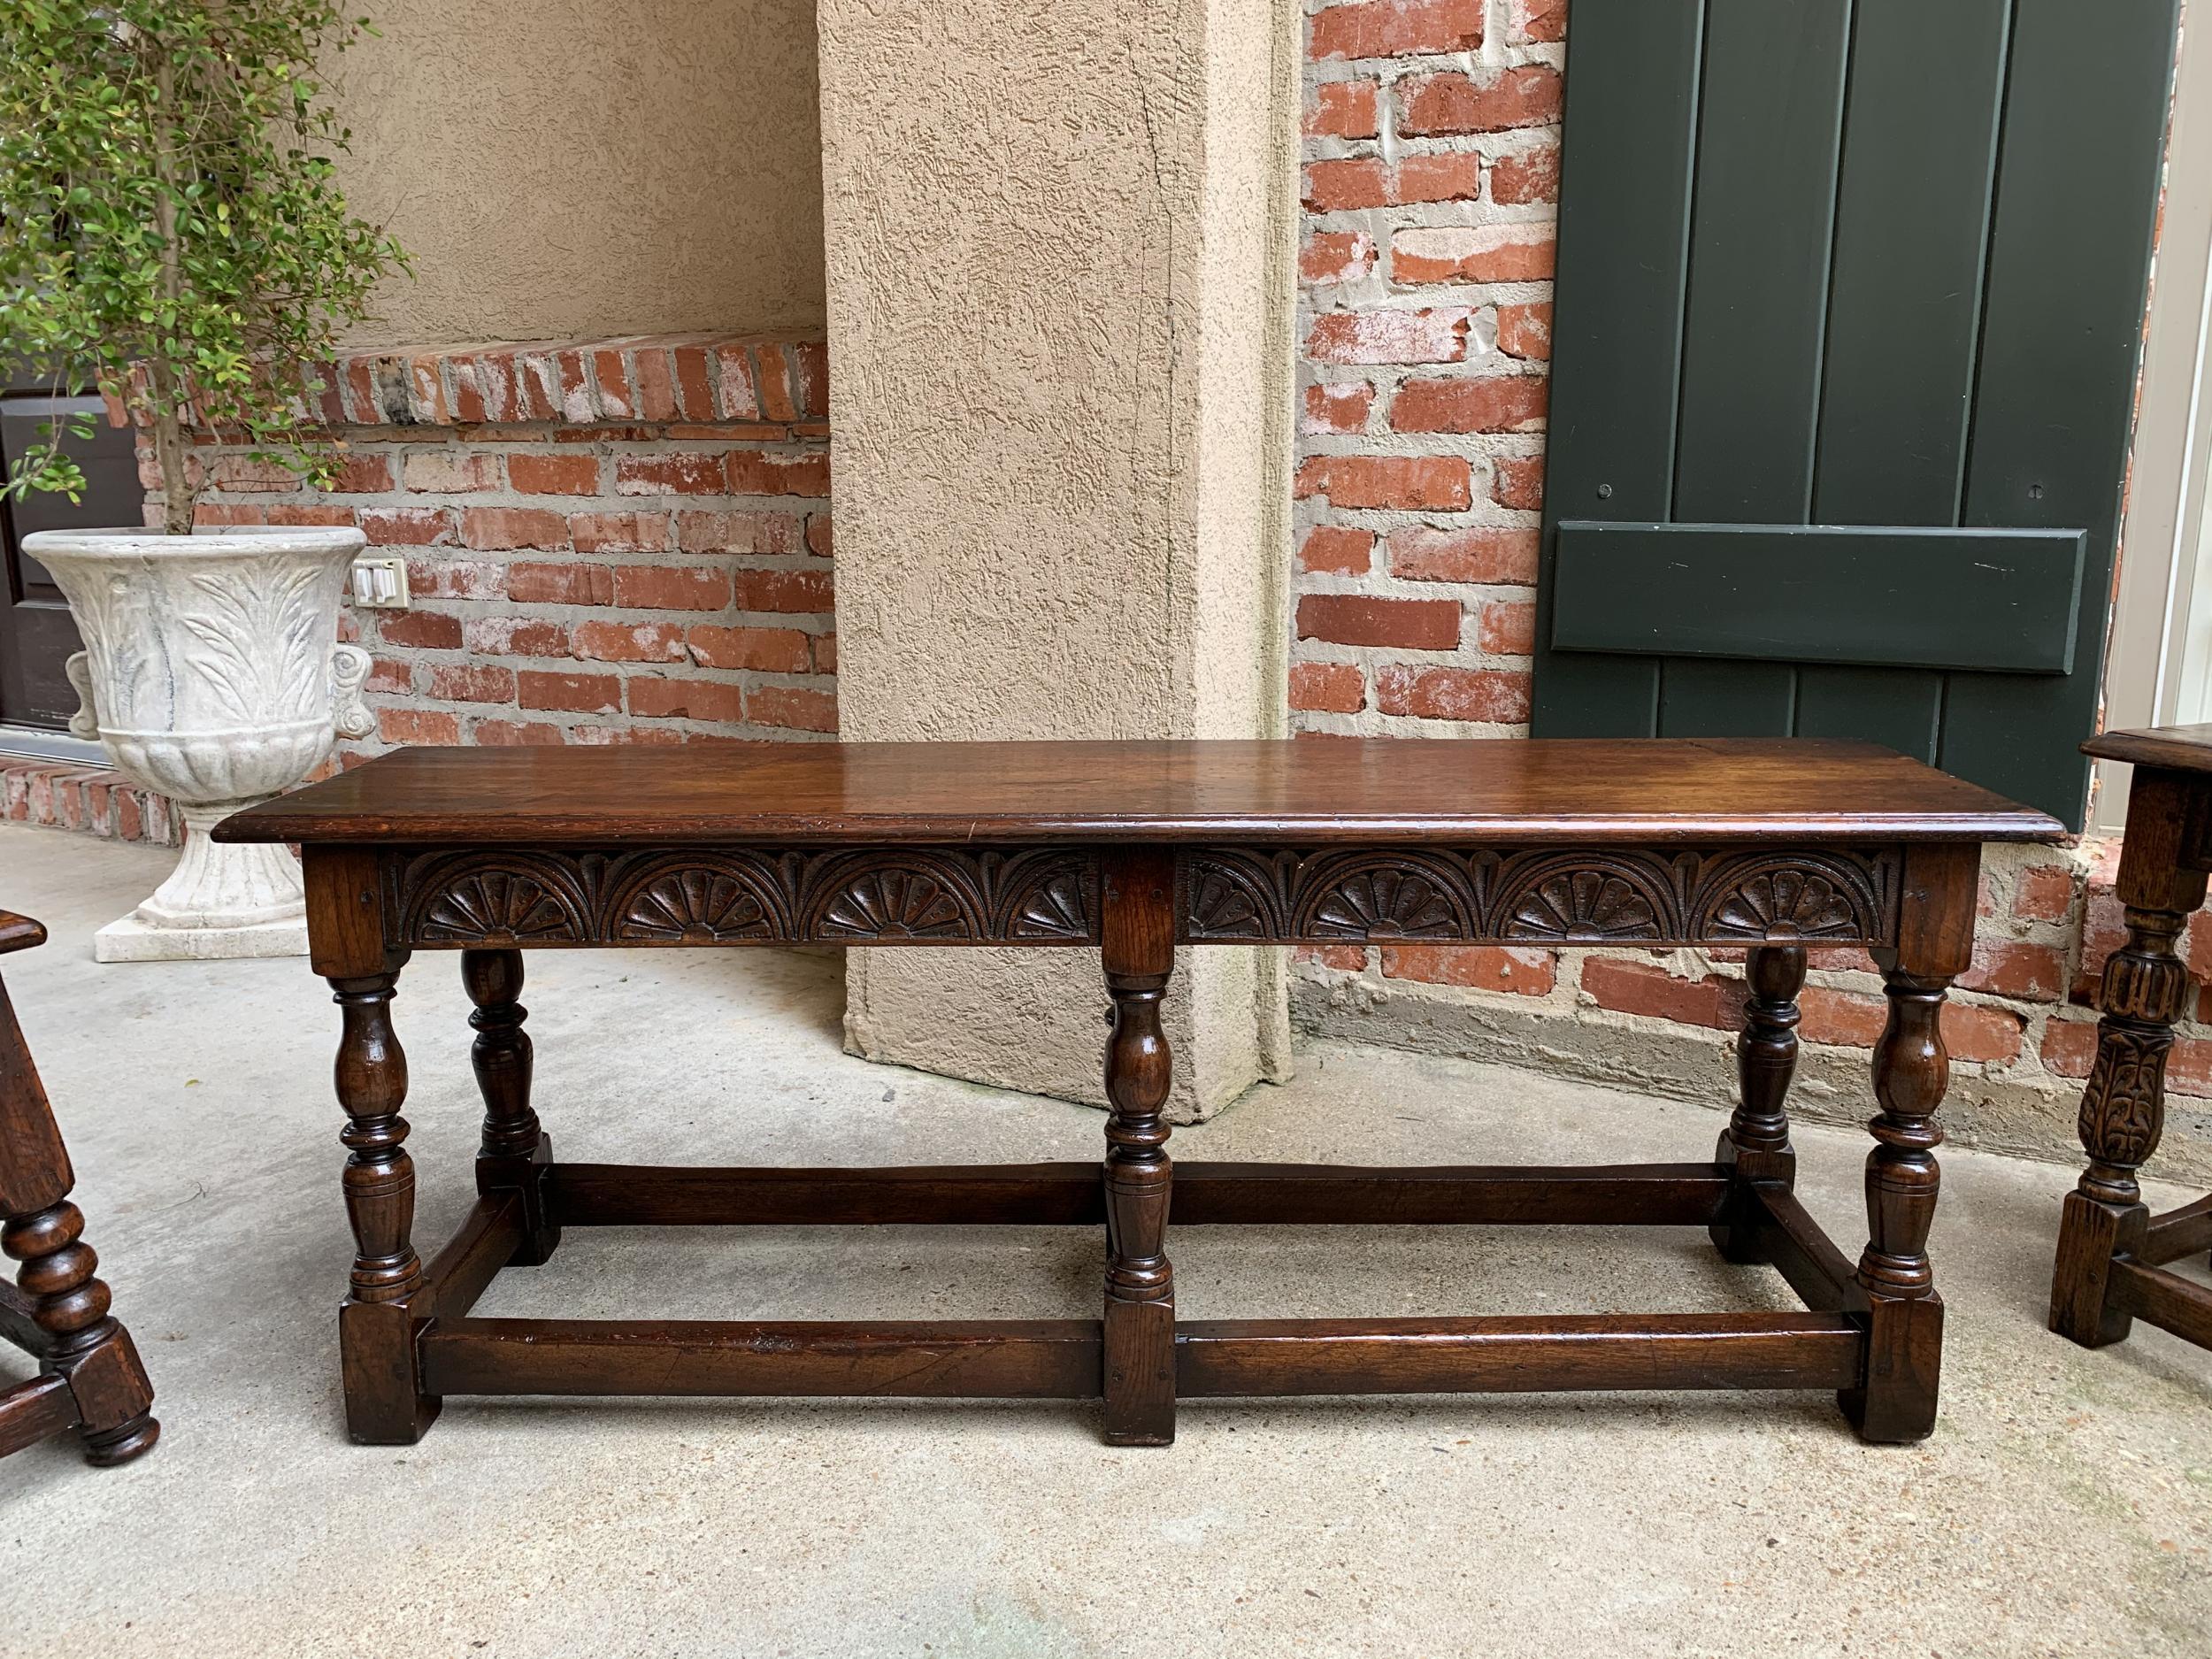 Antique English carved oak hall bench joint stool 4 ft, c 1900

~Direct from England~
~Lovely and versatile antique English bench, in a generous 4 ft. size~
~Wide apron is carved on all sides with traditional lunette design~
~Six elaborately